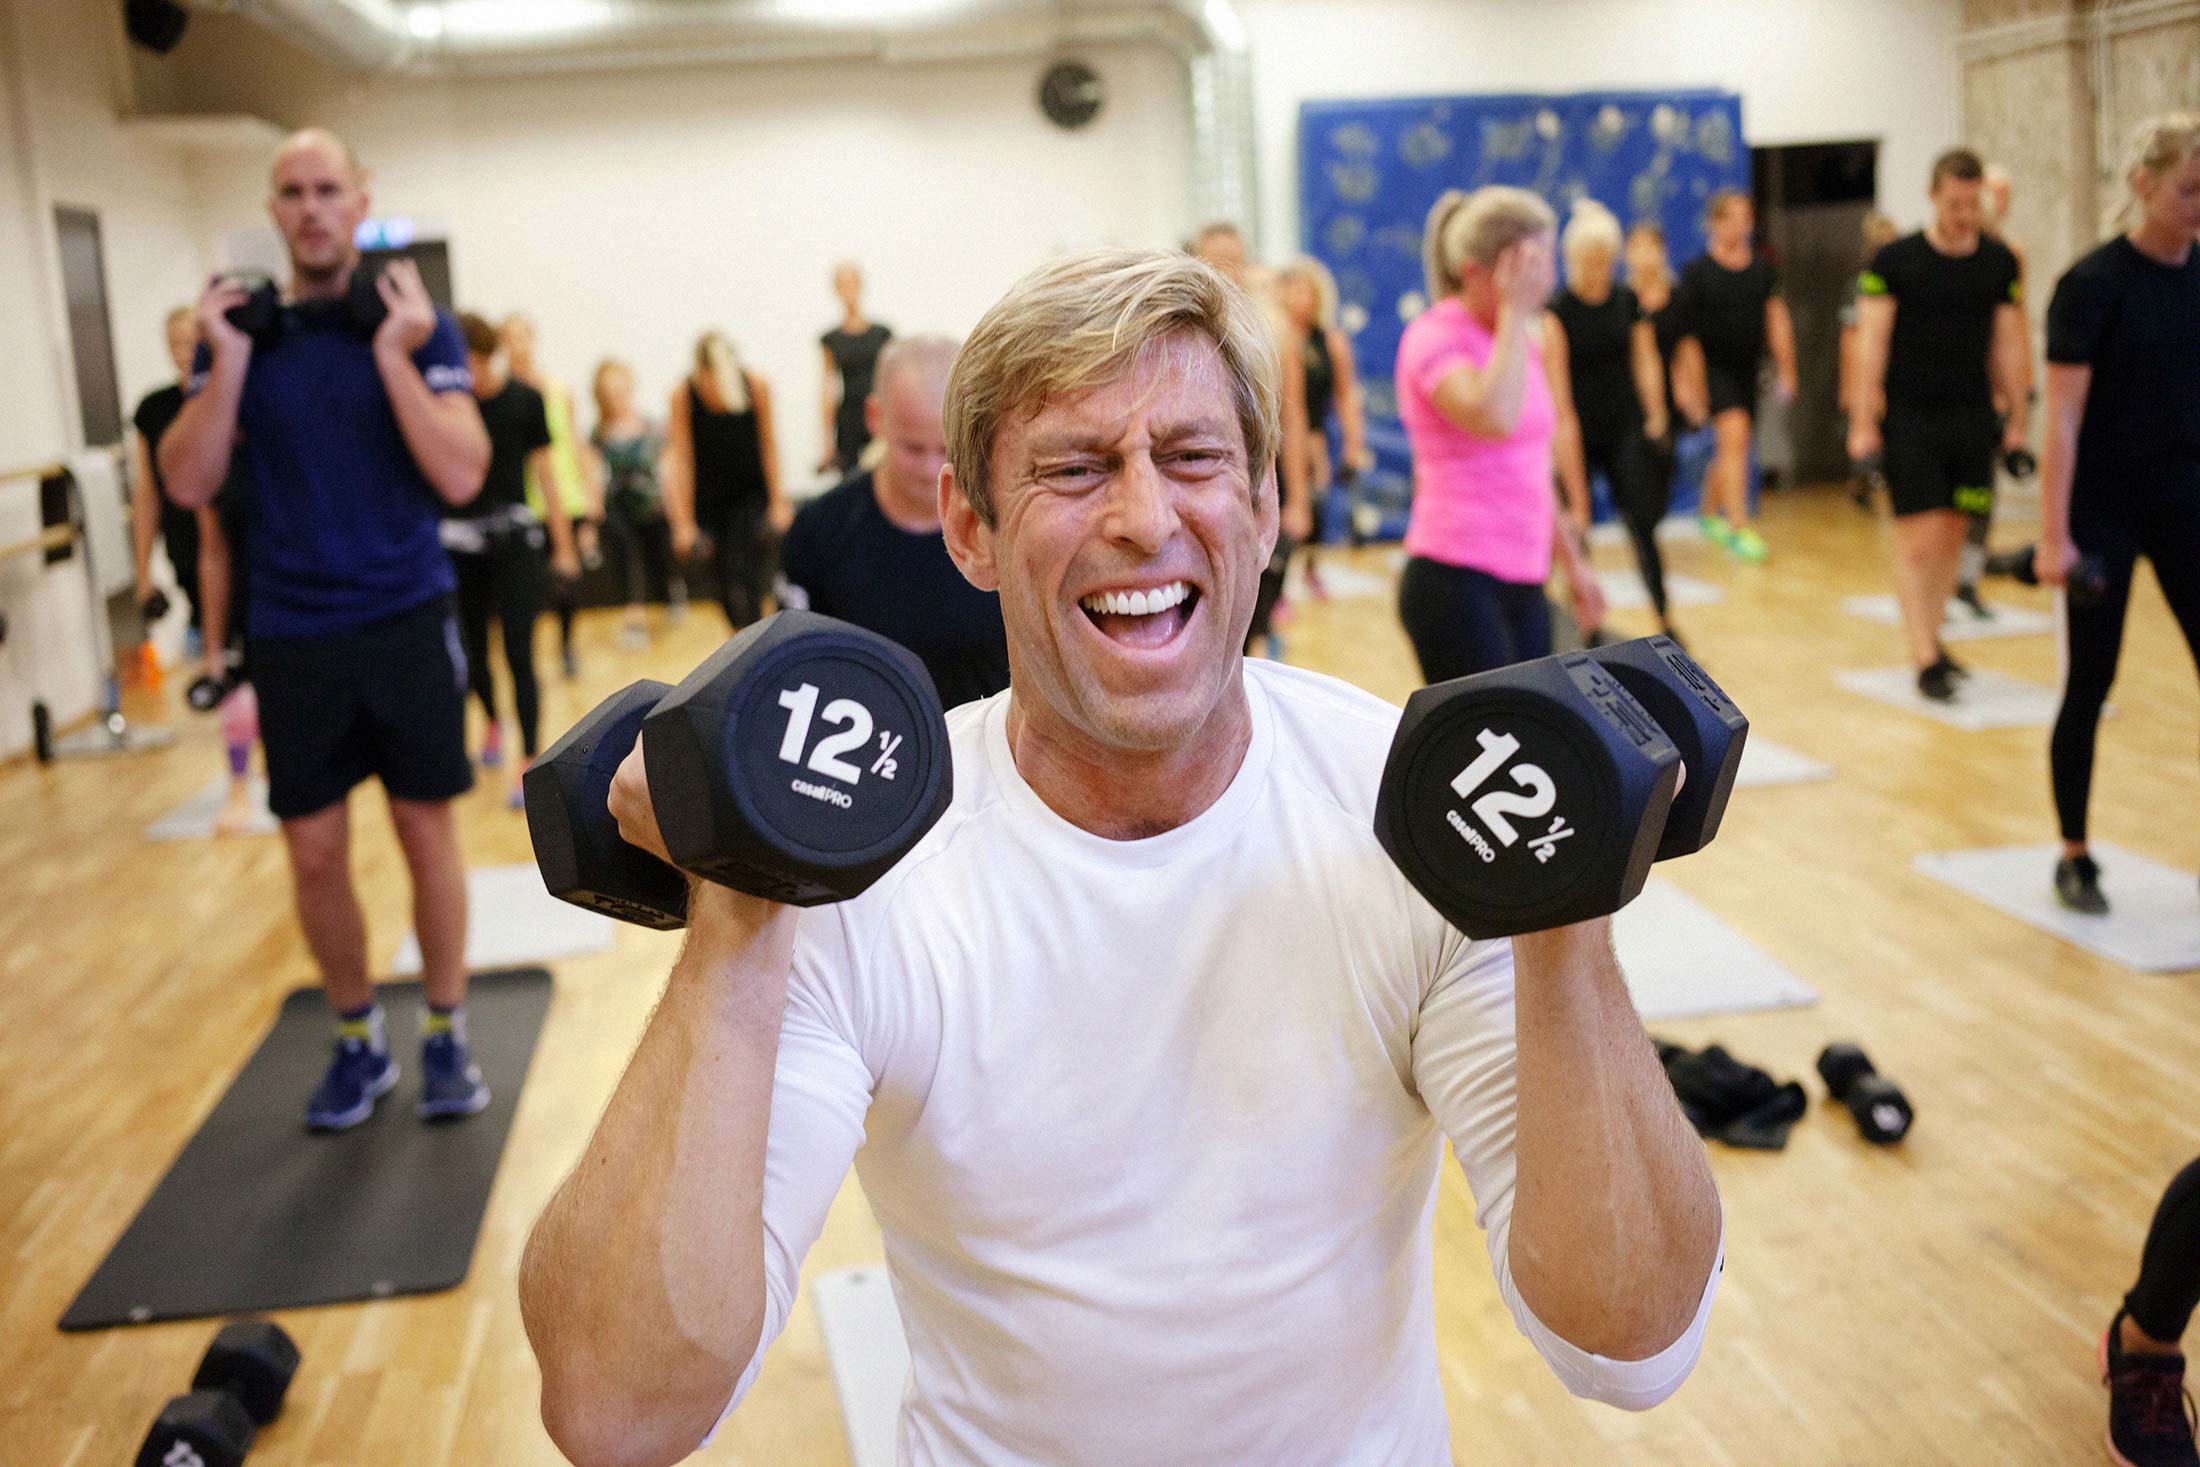 Henrik Bunge working out with his employees during a Sports Hour session at Bjorn Borg headquarters in Stockholm.